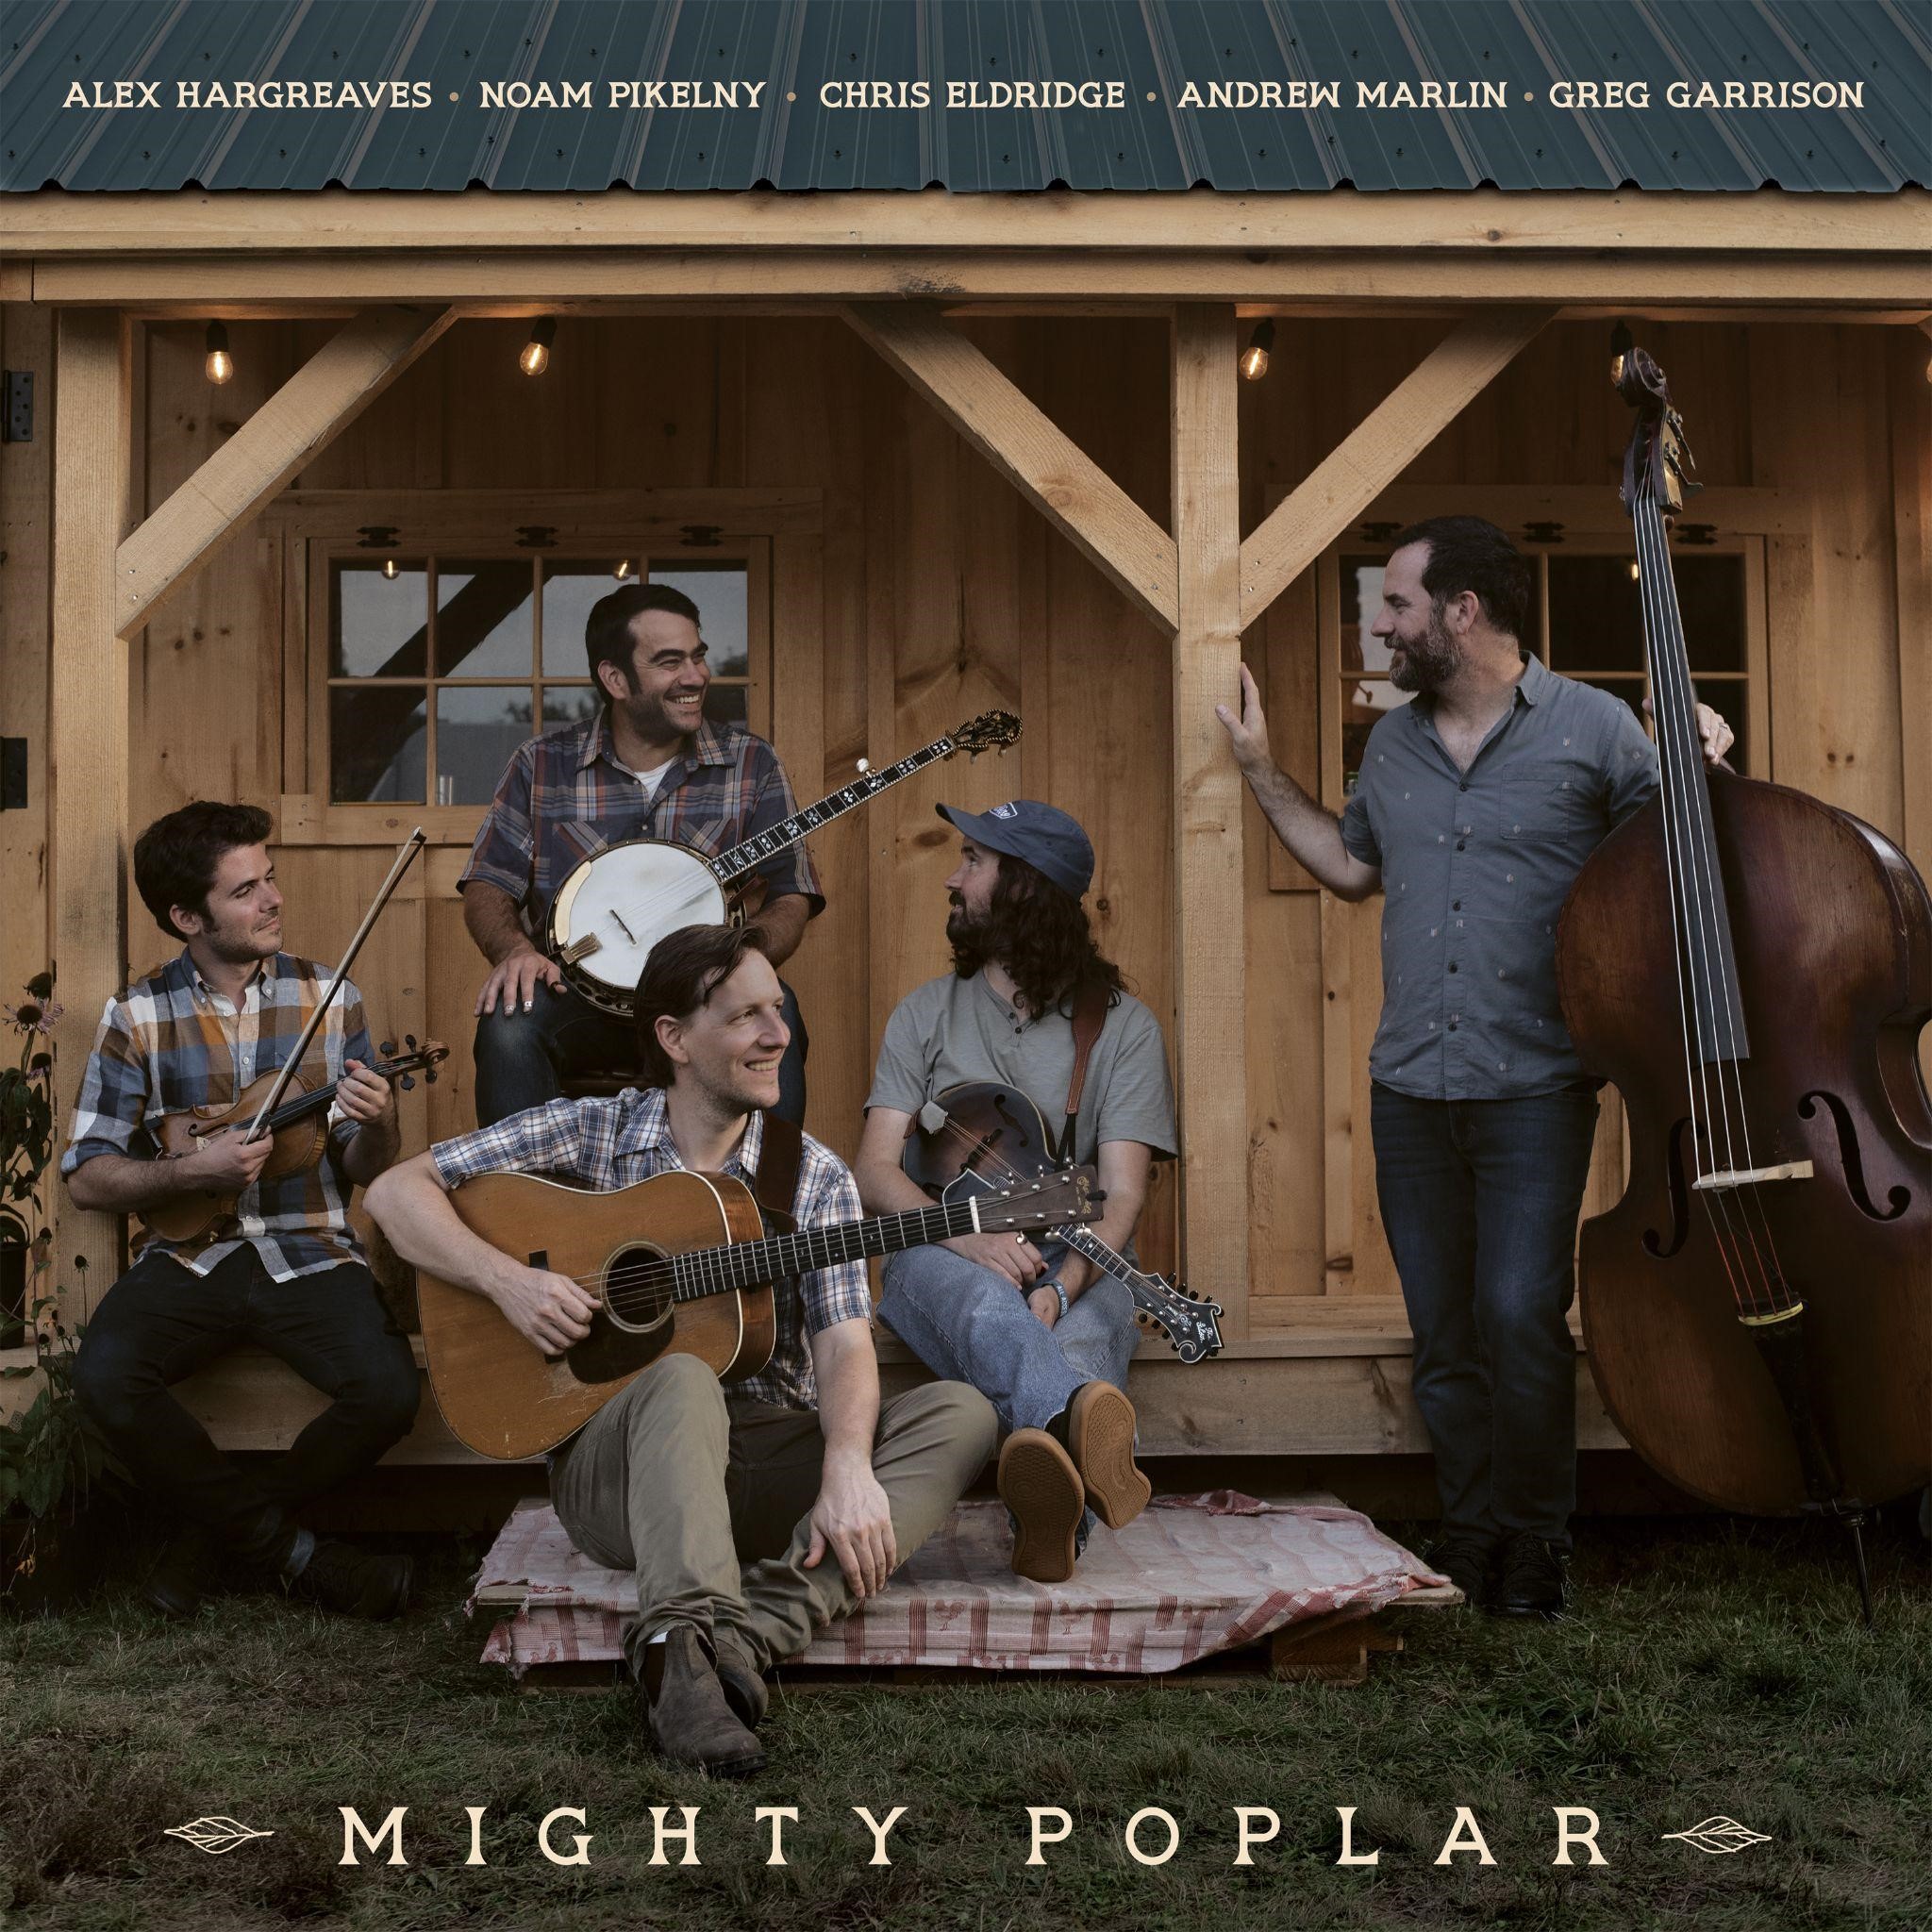 MIGHTY POPLAR ANNOUNCES DEBUT ALBUM ON FREE DIRT RECORDS COMING MARCH 31, 2023